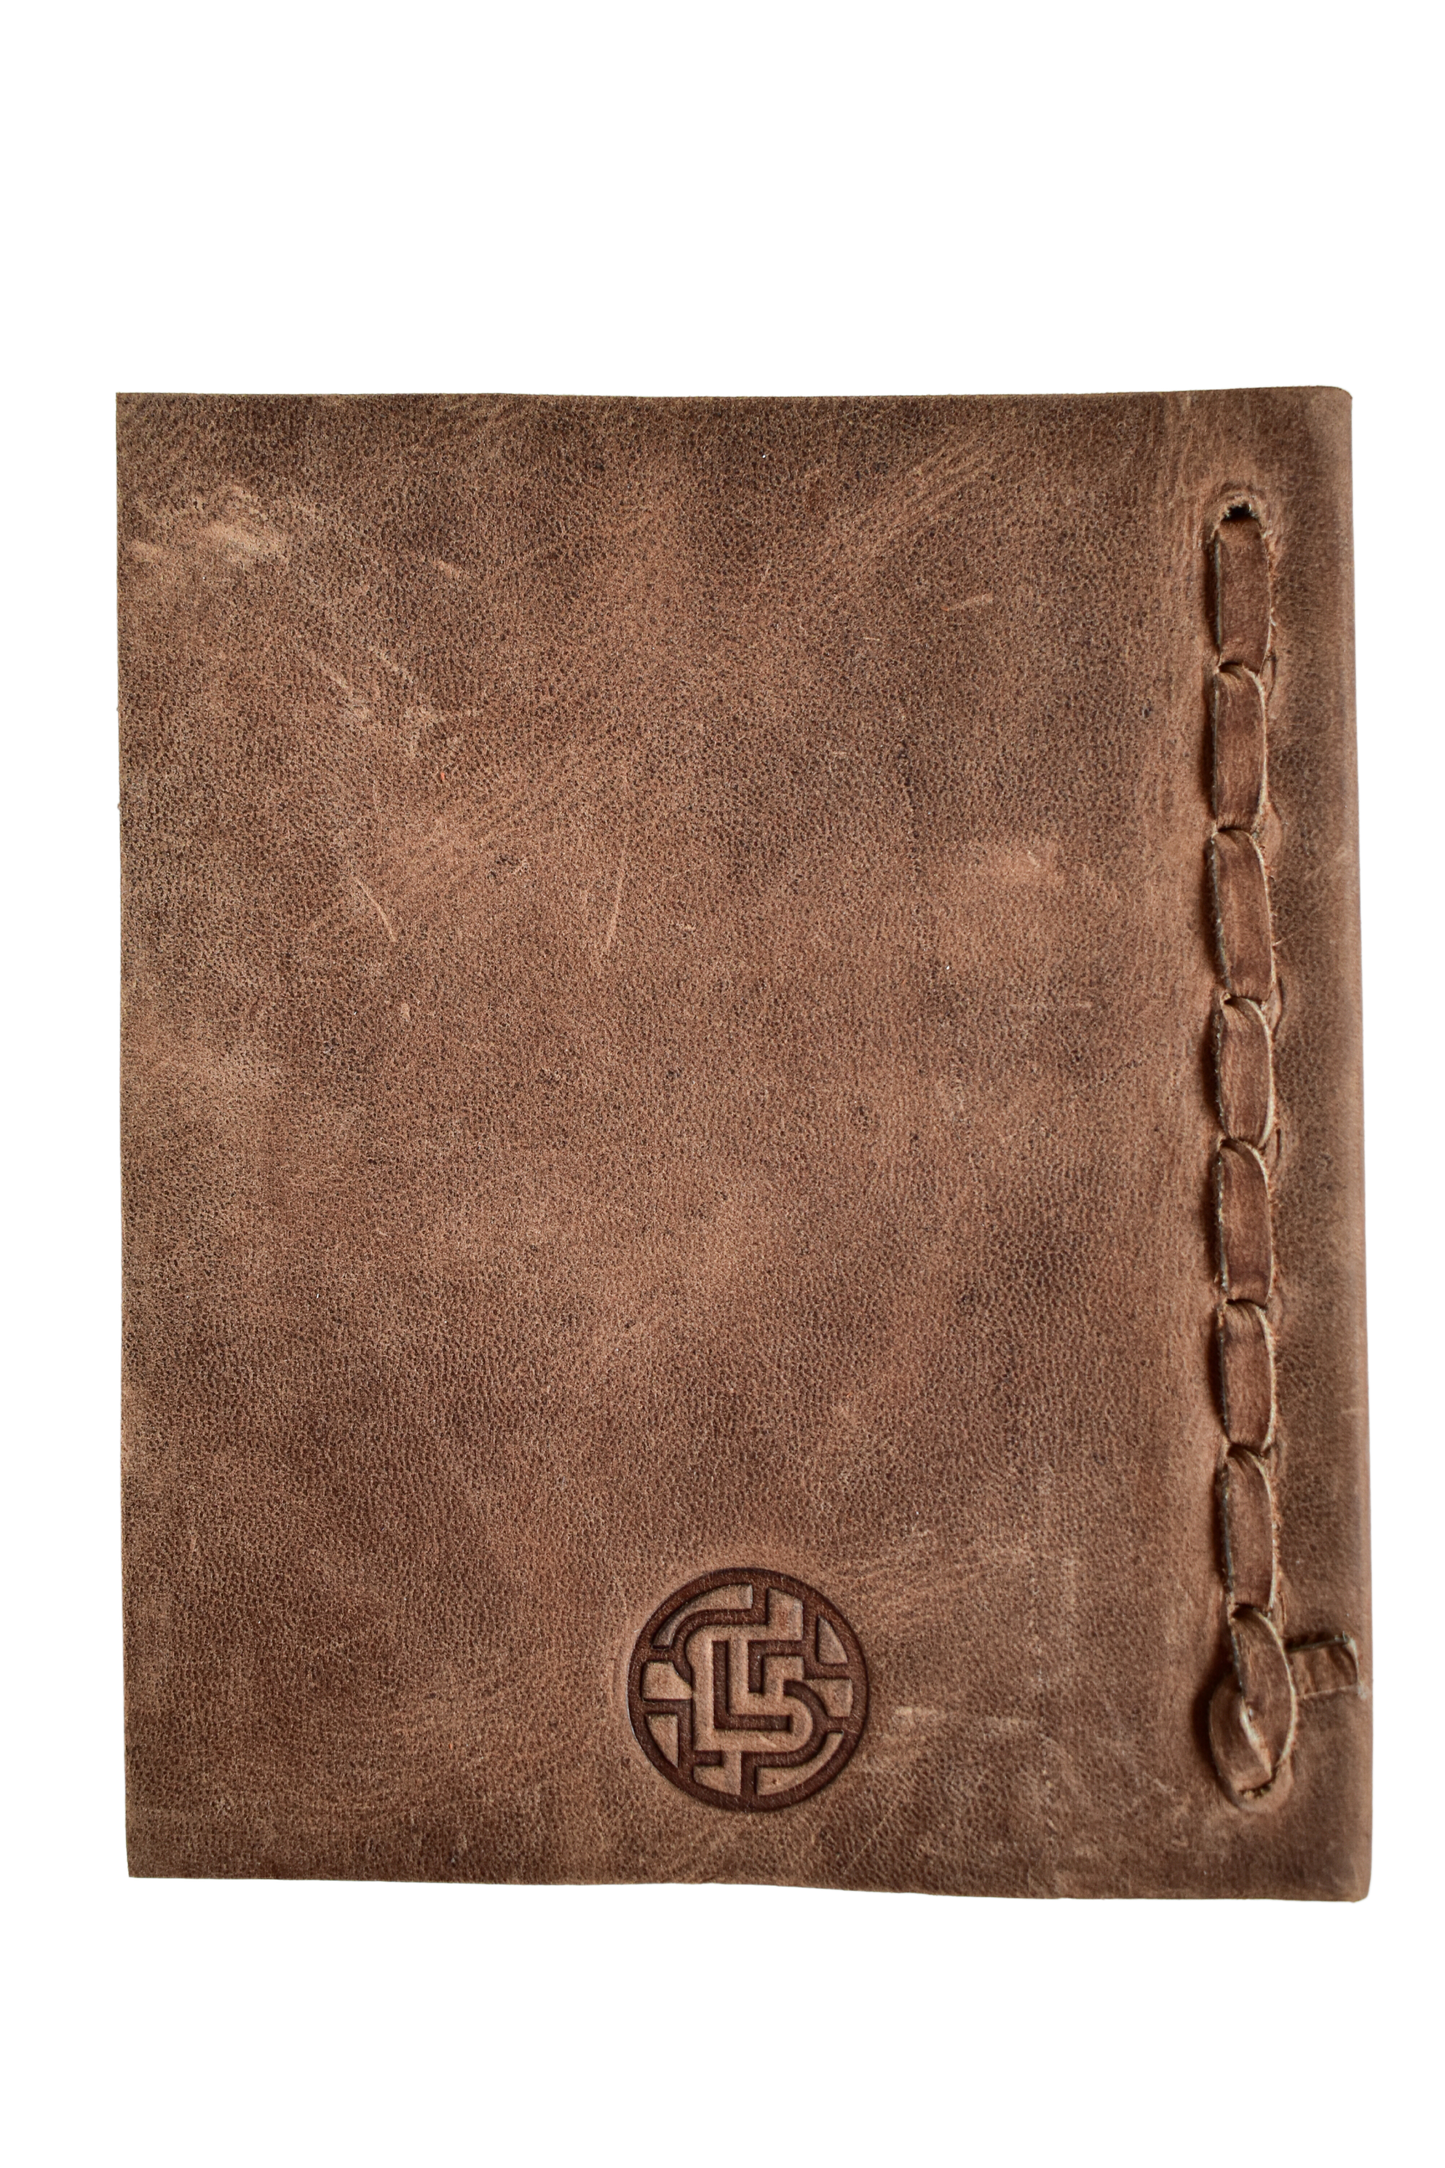 Rustic Compact Journal